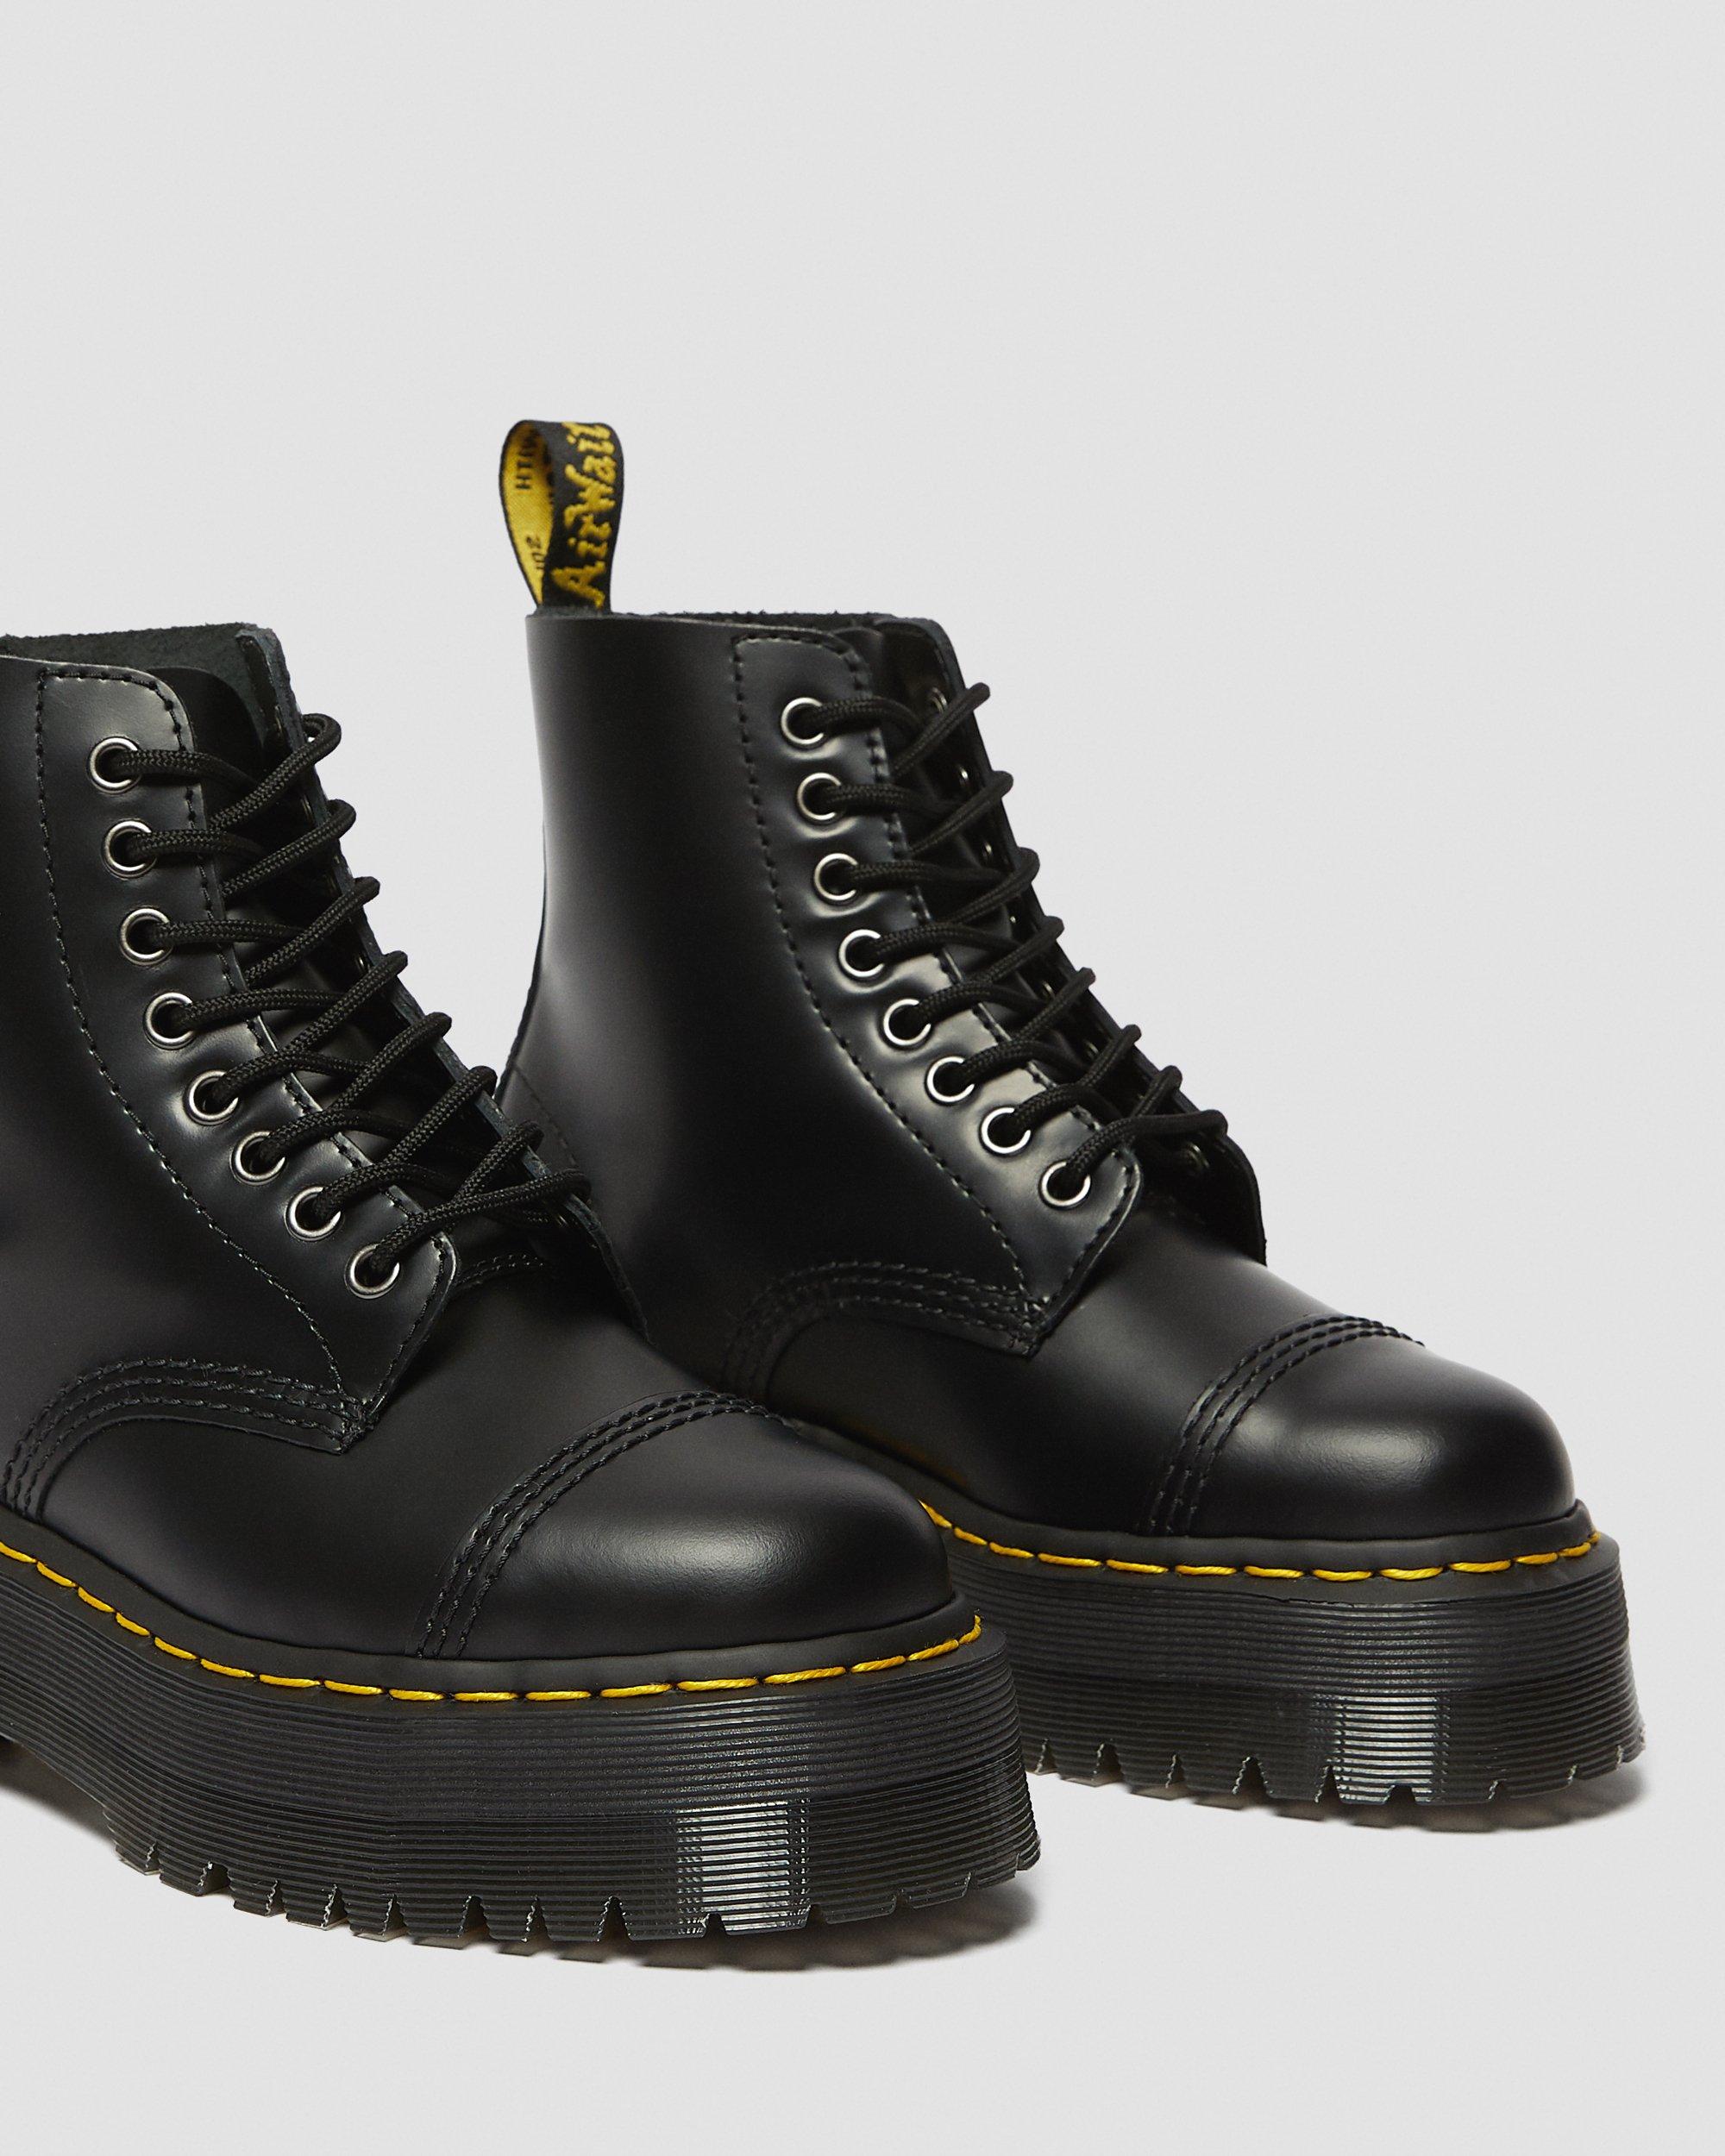 Sinclair Smooth Women's Leather Platform Boots | Dr. Martens